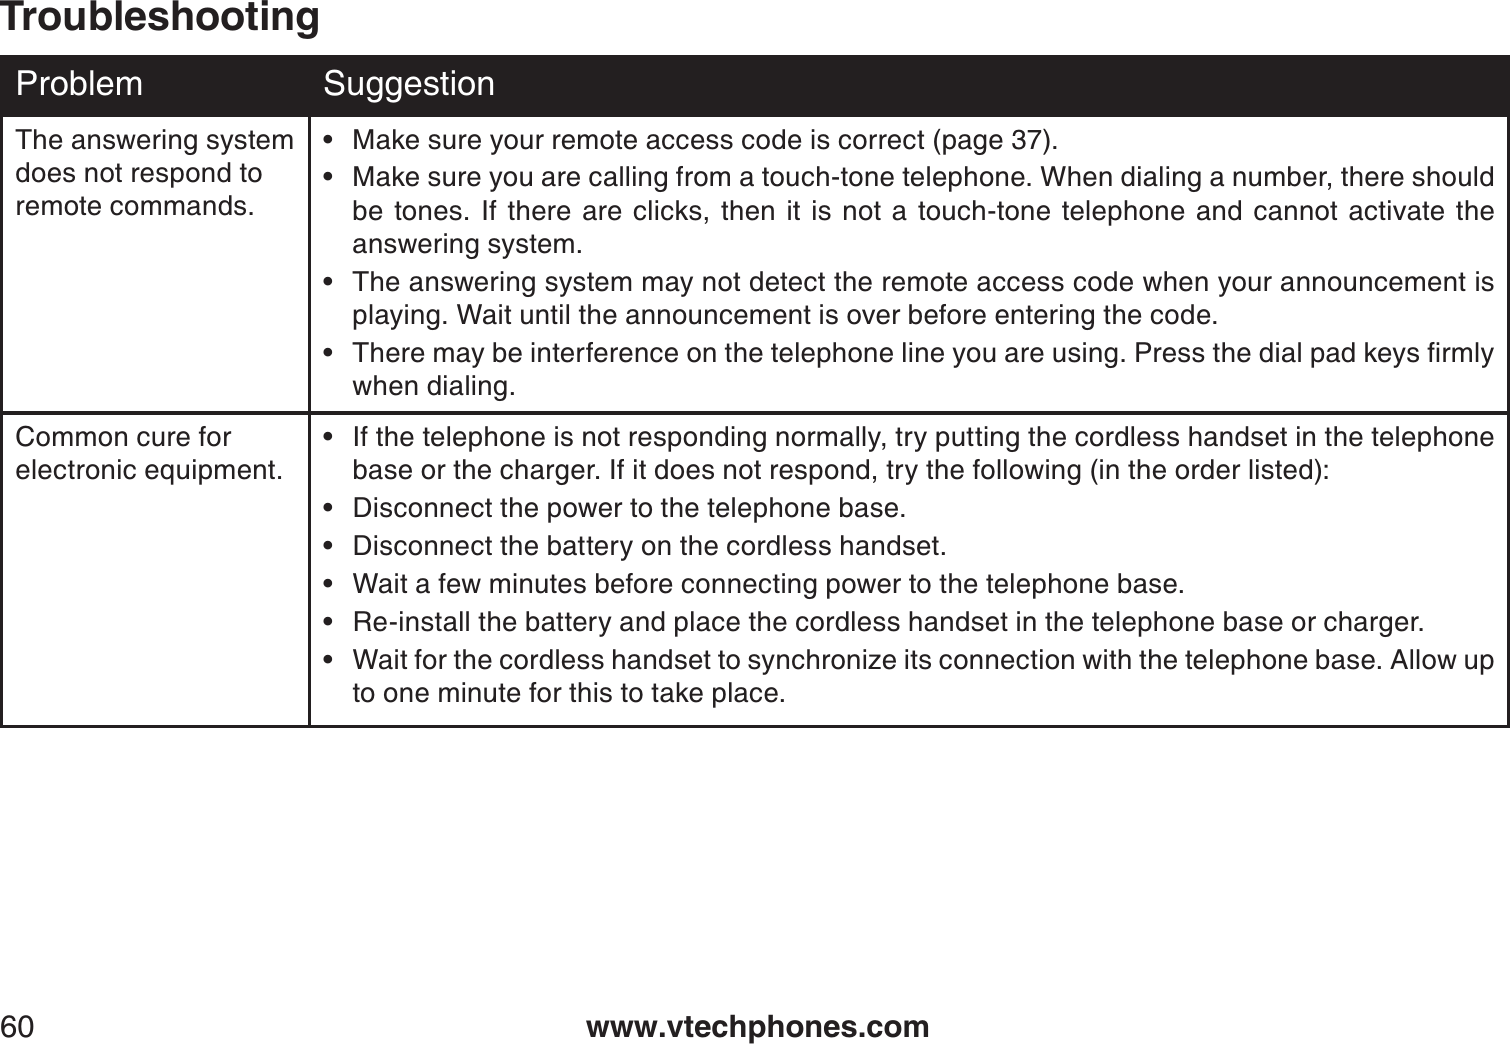 www.vtechphones.com60TroubleshootingProblem SuggestionThe answering system does not respond to remote commands.Make sure your remote access code is correct (page 37).Make sure you are calling from a touch-tone telephone. When dialing a number, there should be tones. If there are clicks, then it is not a touch-tone telephone and cannot activate the answering system.The answering system may not detect the remote access code when your announcement isplaying. Wait until the announcement is over before entering the code.6JGTGOC[DGKPVGTHGTGPEGQPVJGVGNGRJQPGNKPG[QWCTGWUKPI2TGUUVJGFKCNRCFMG[UſTON[when dialing.••••Common cure for electronic equipment.If the telephone is not responding normally, try putting the cordless handset in the telephone base or the charger. If it does not respond, try the following (in the order listed):Disconnect the power to the telephone base.Disconnect the battery on the cordless handset.Wait a few minutes before connecting power to the telephone base.Re-install the battery and place the cordless handset in the telephone base or charger.Wait for the cordless handset to synchronize its connection with the telephone base. Allow up to one minute for this to take place.••••••